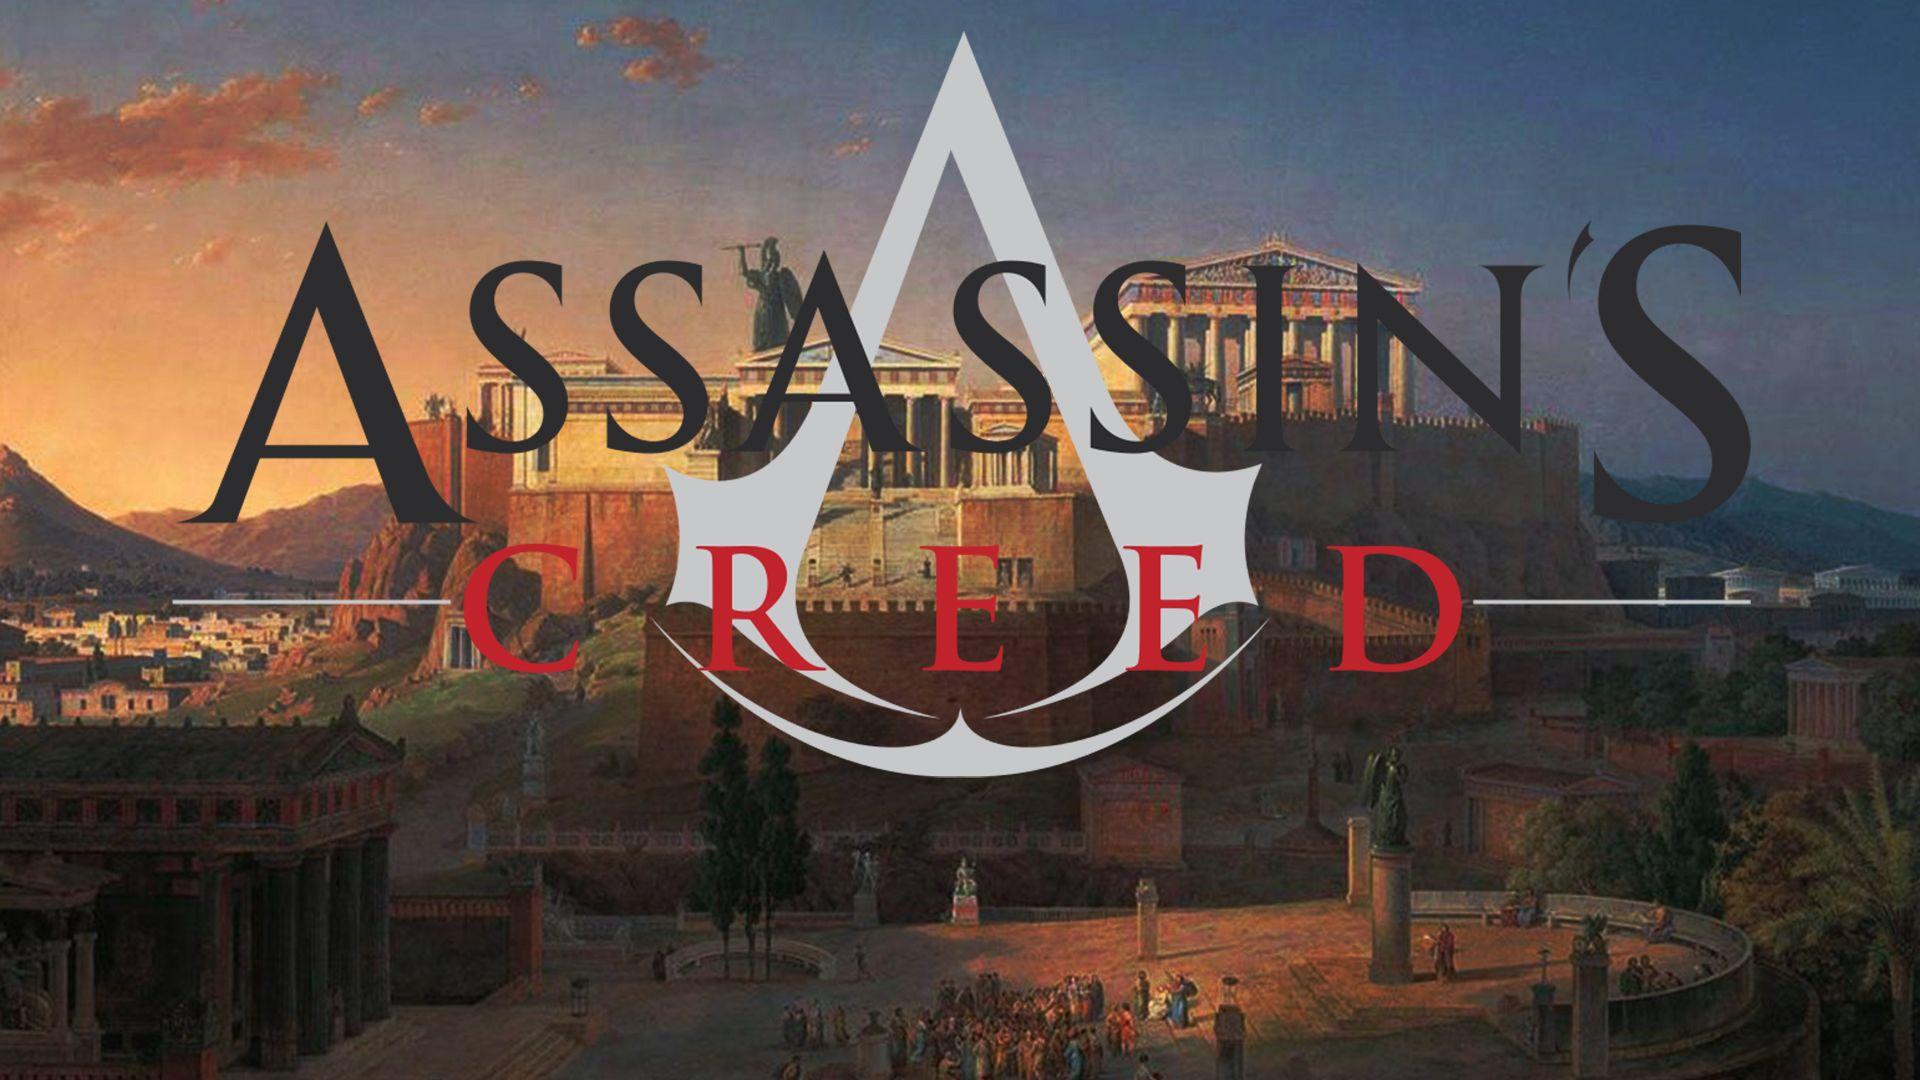 Assassin's Creed is Heading to Greece This Year